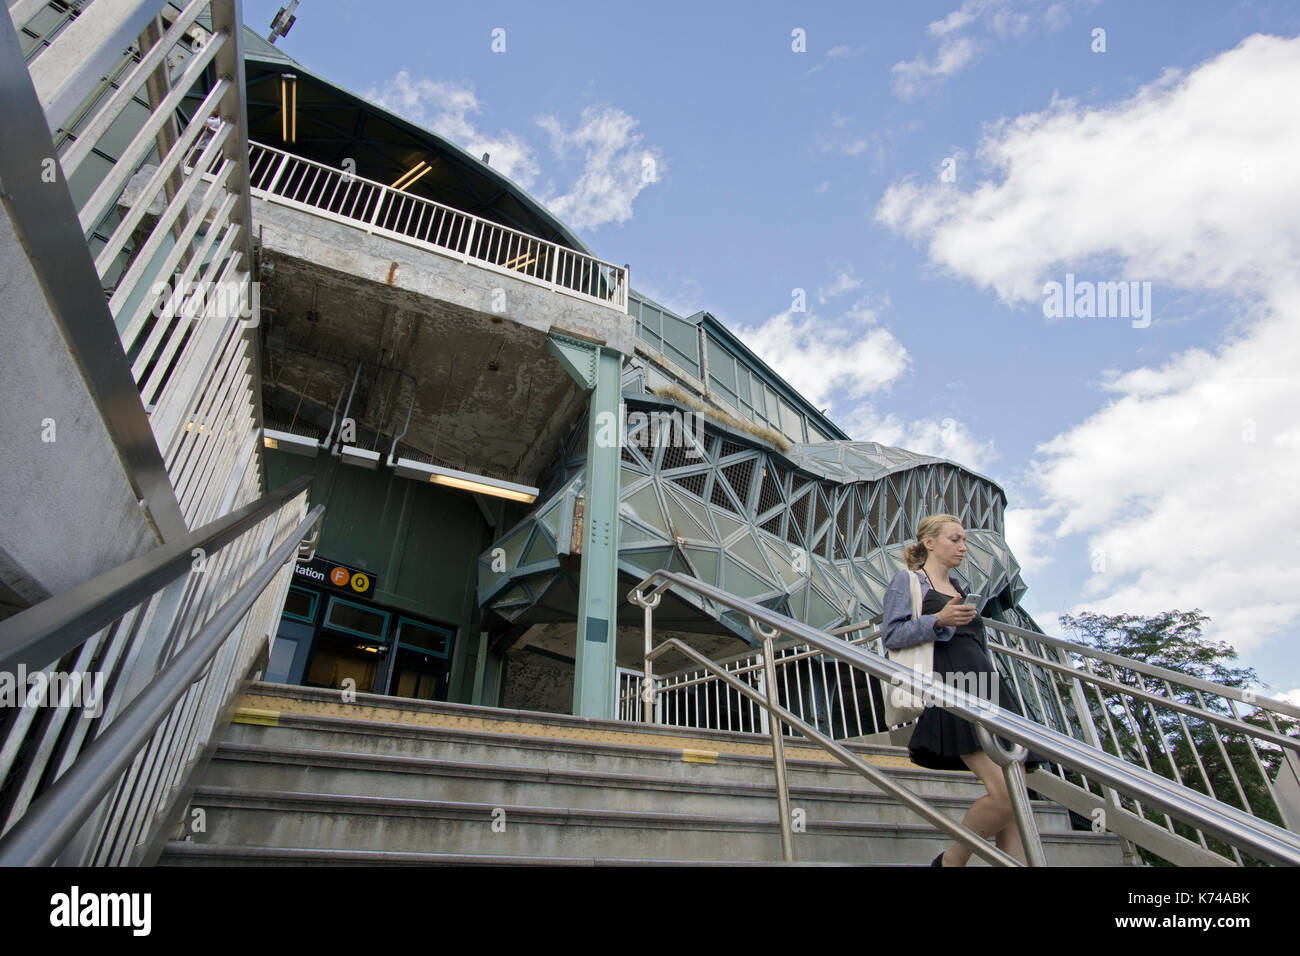 A commuter descending the staircase of the West 8 Street elevated subway station in Coney Island, Brooklyn, New York City. Stock Photo